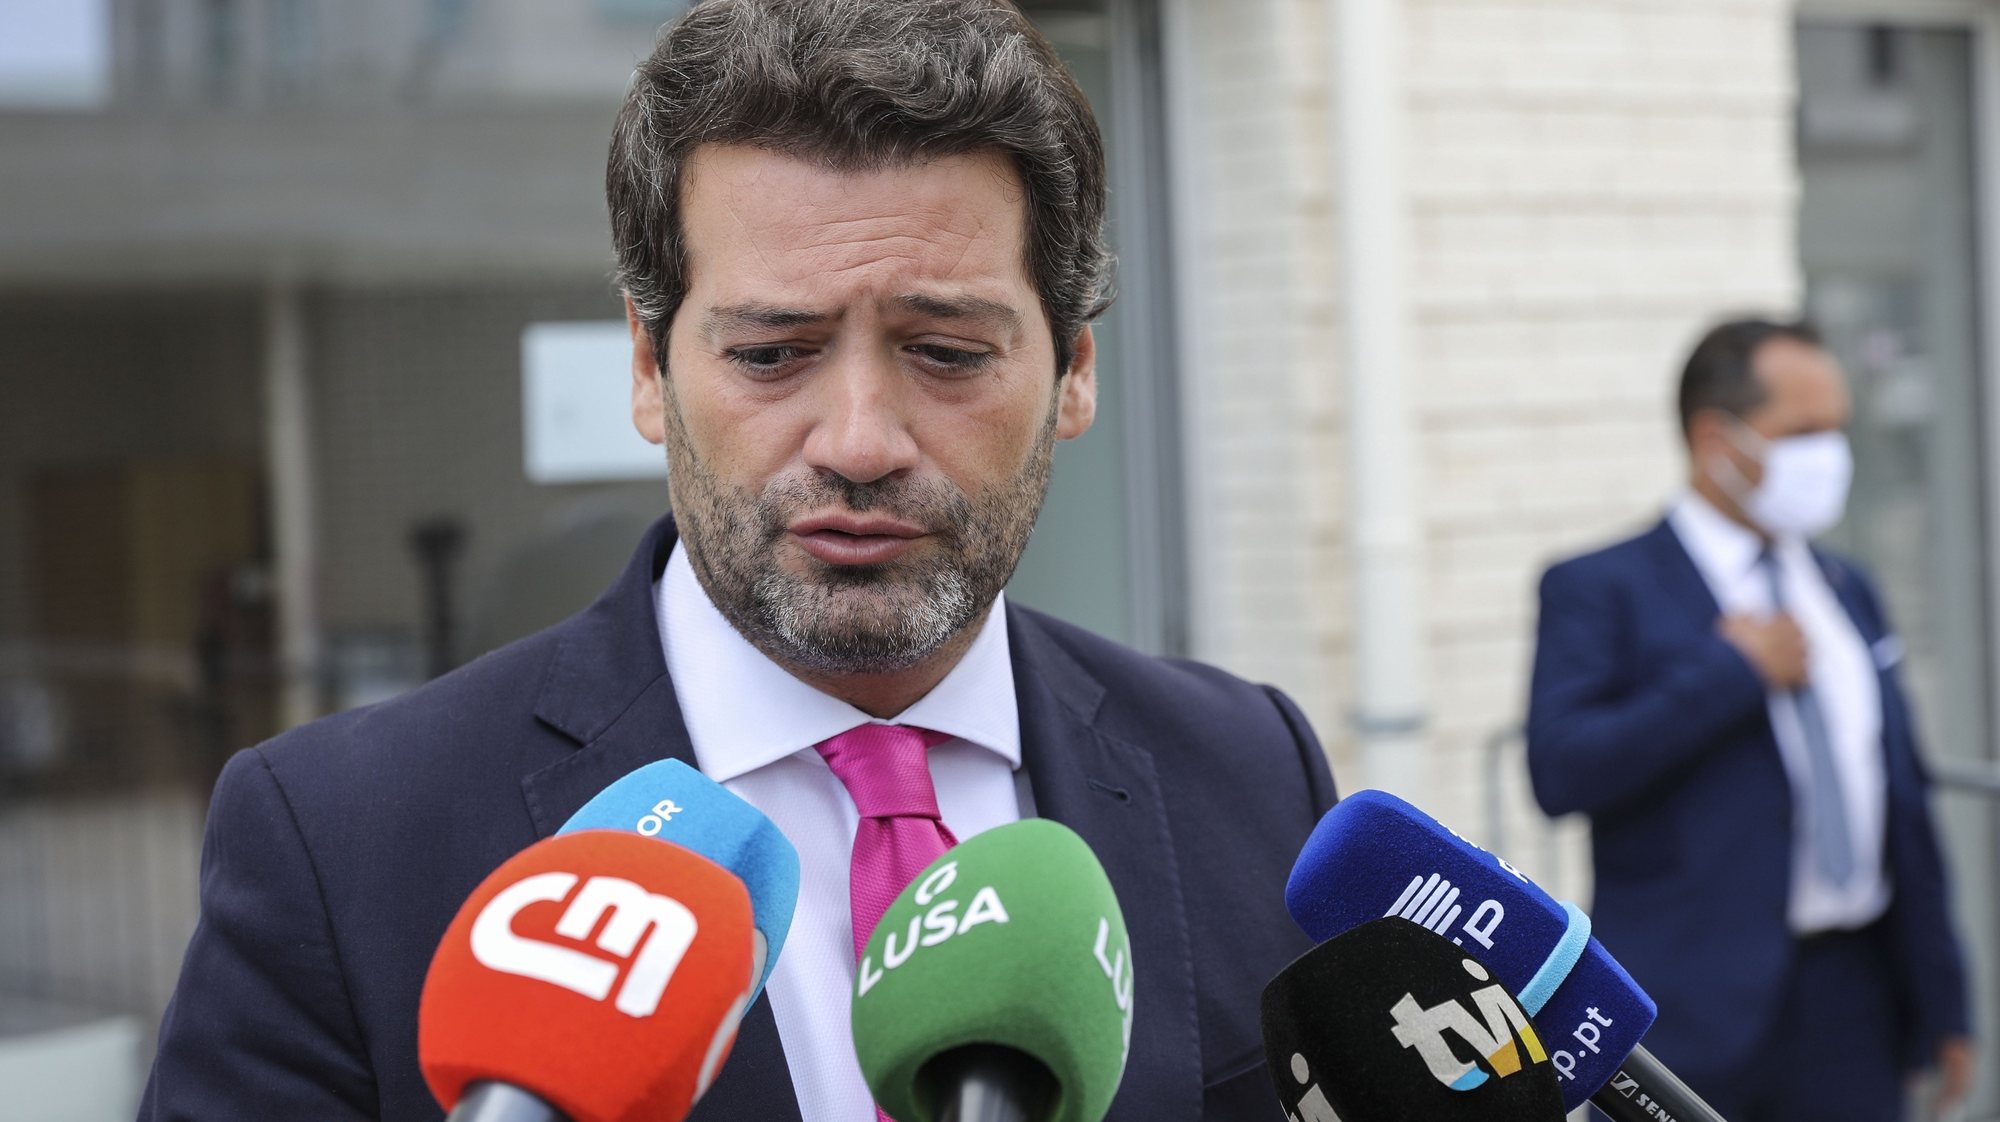 Portuguese national conservative, right-wing populist political party Chega leader André Ventura talks to the press after voting for local elections 26 septeber 2021 in Lisbon. More than 9.3 million electors can vote in the local elections in Portugal. MIGUEL A. LOPES LUSA